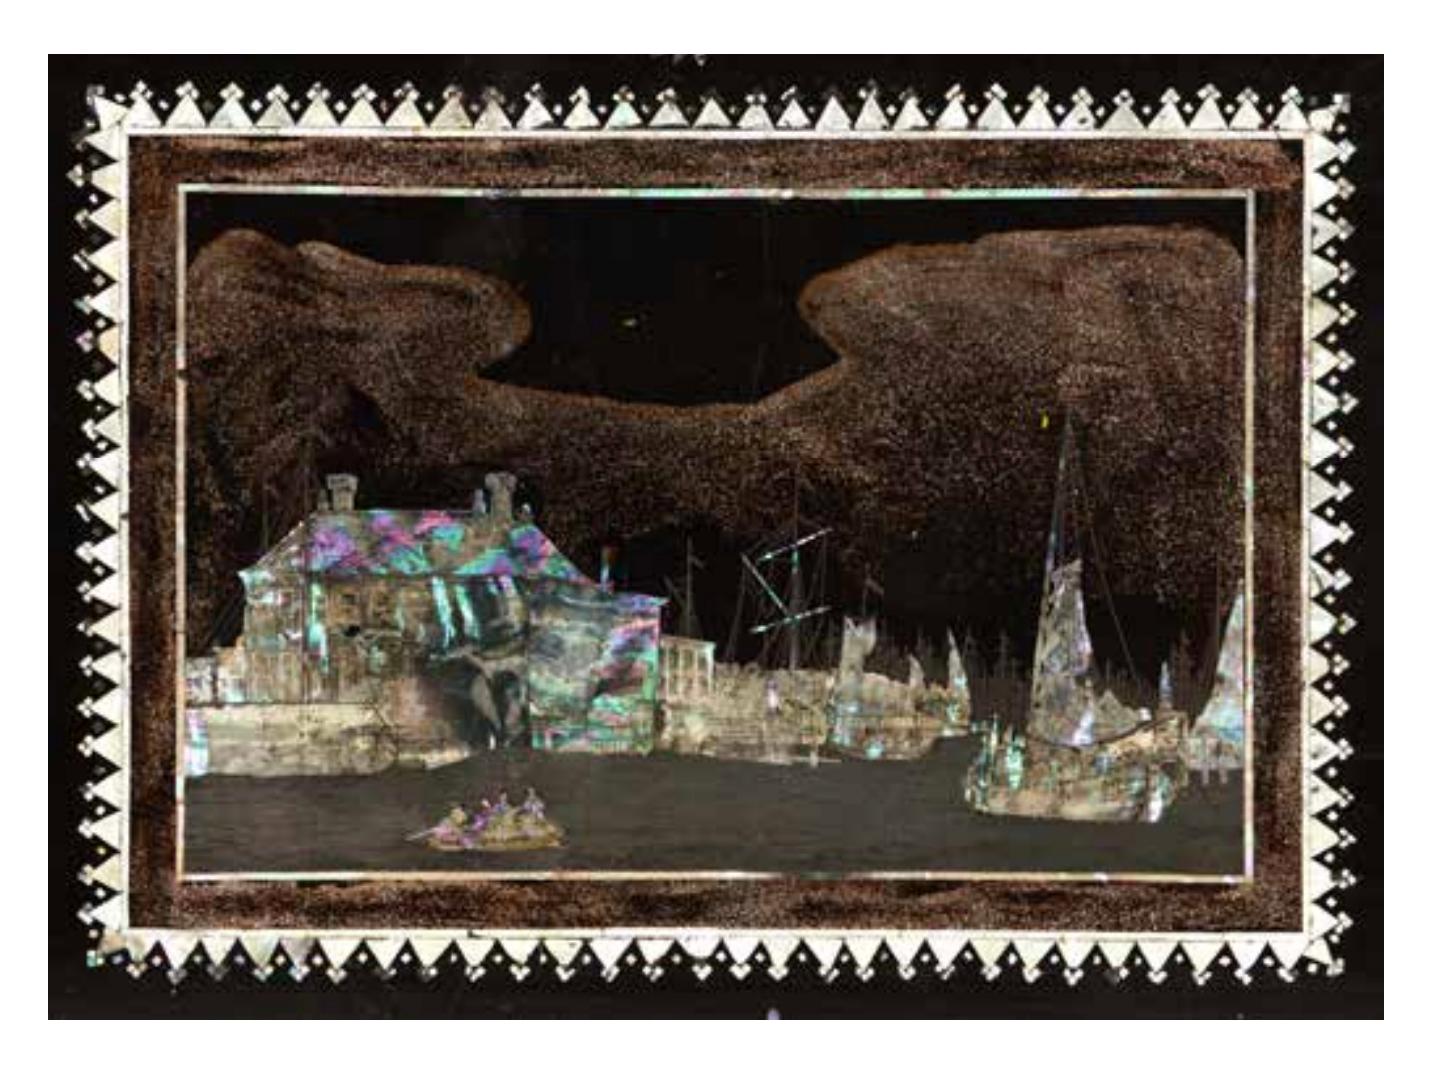 An important Japanese lacquer box with a view of The 'Nieuwe Stadsherberg Van Amsterdam

Nagasaki, Edo-period, 1830-1840

The black lacquered wood box, decorated in gold and inlaid with mother-of-pearl, depicting the cityscape of